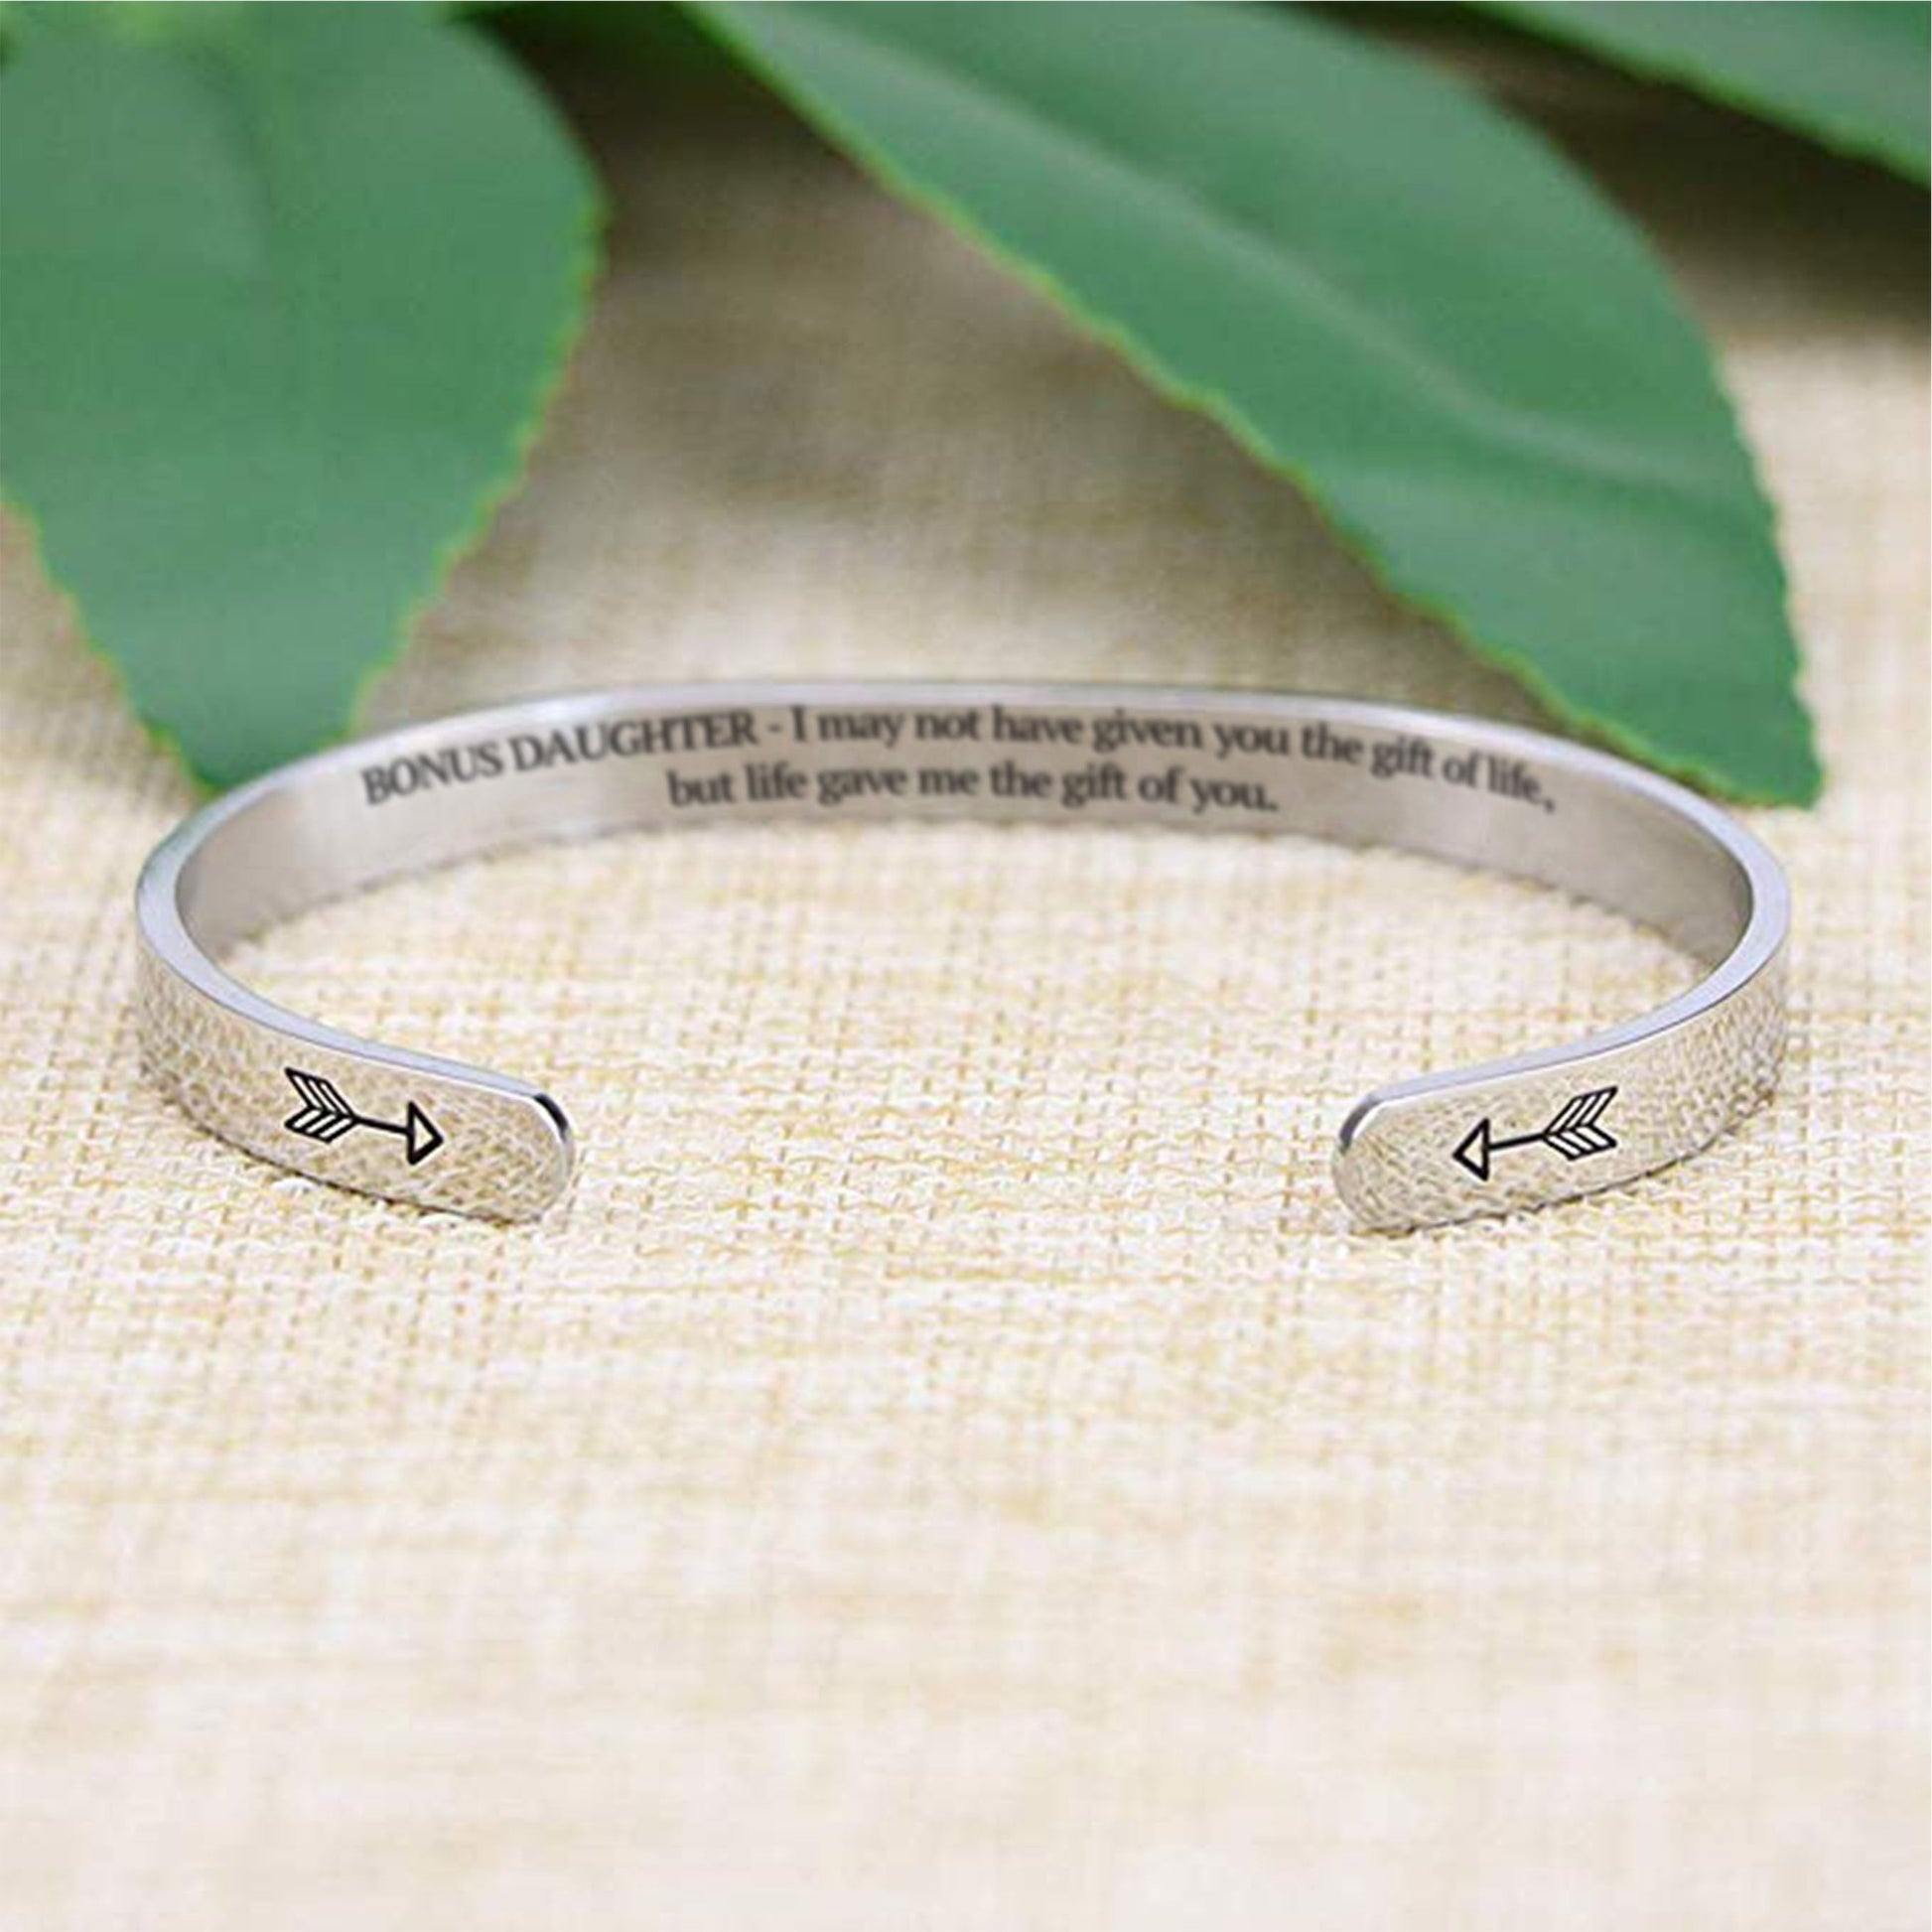 I may not have given you the gift of life but life gave me the gift of you bracelet with silver plating with arrows in focus on a burlap surface with a leafy background